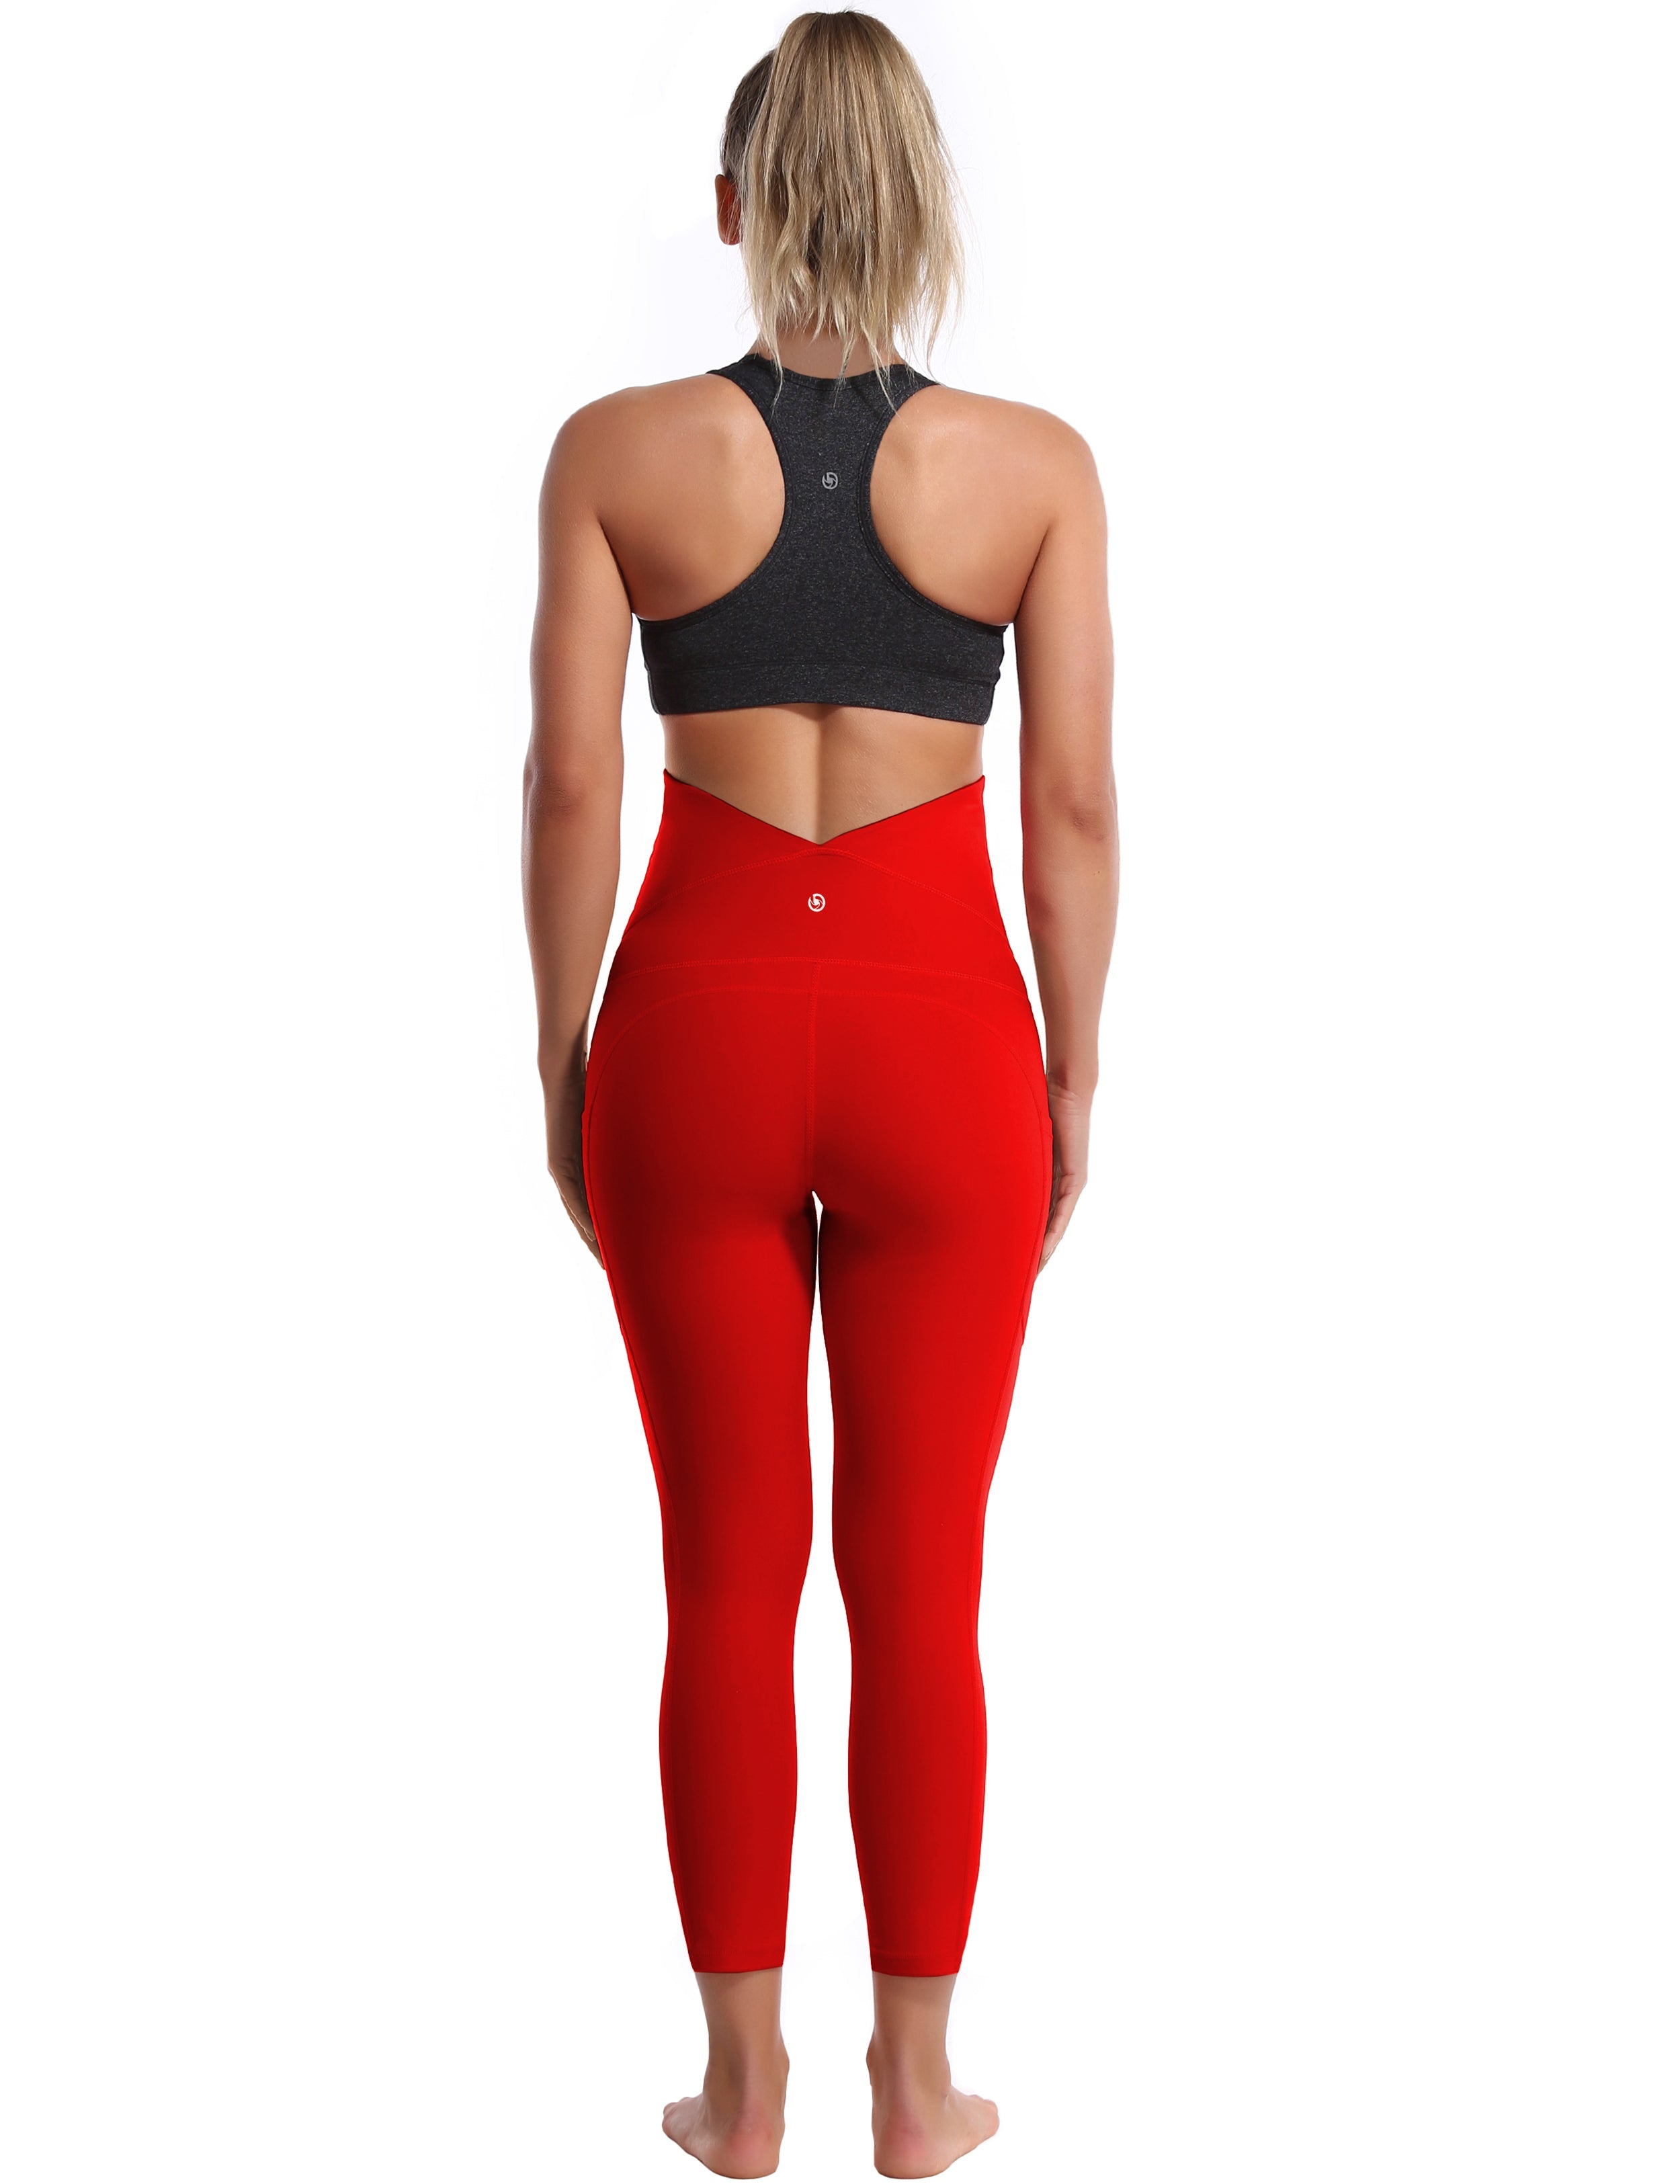 22" Side Pockets Maternity Jogging Pants scarlet 87%Nylon/13%Spandex Softest-ever fabric High elasticity 4-way stretch Fabric doesn't attract lint easily No see-through Moisture-wicking Machine wash